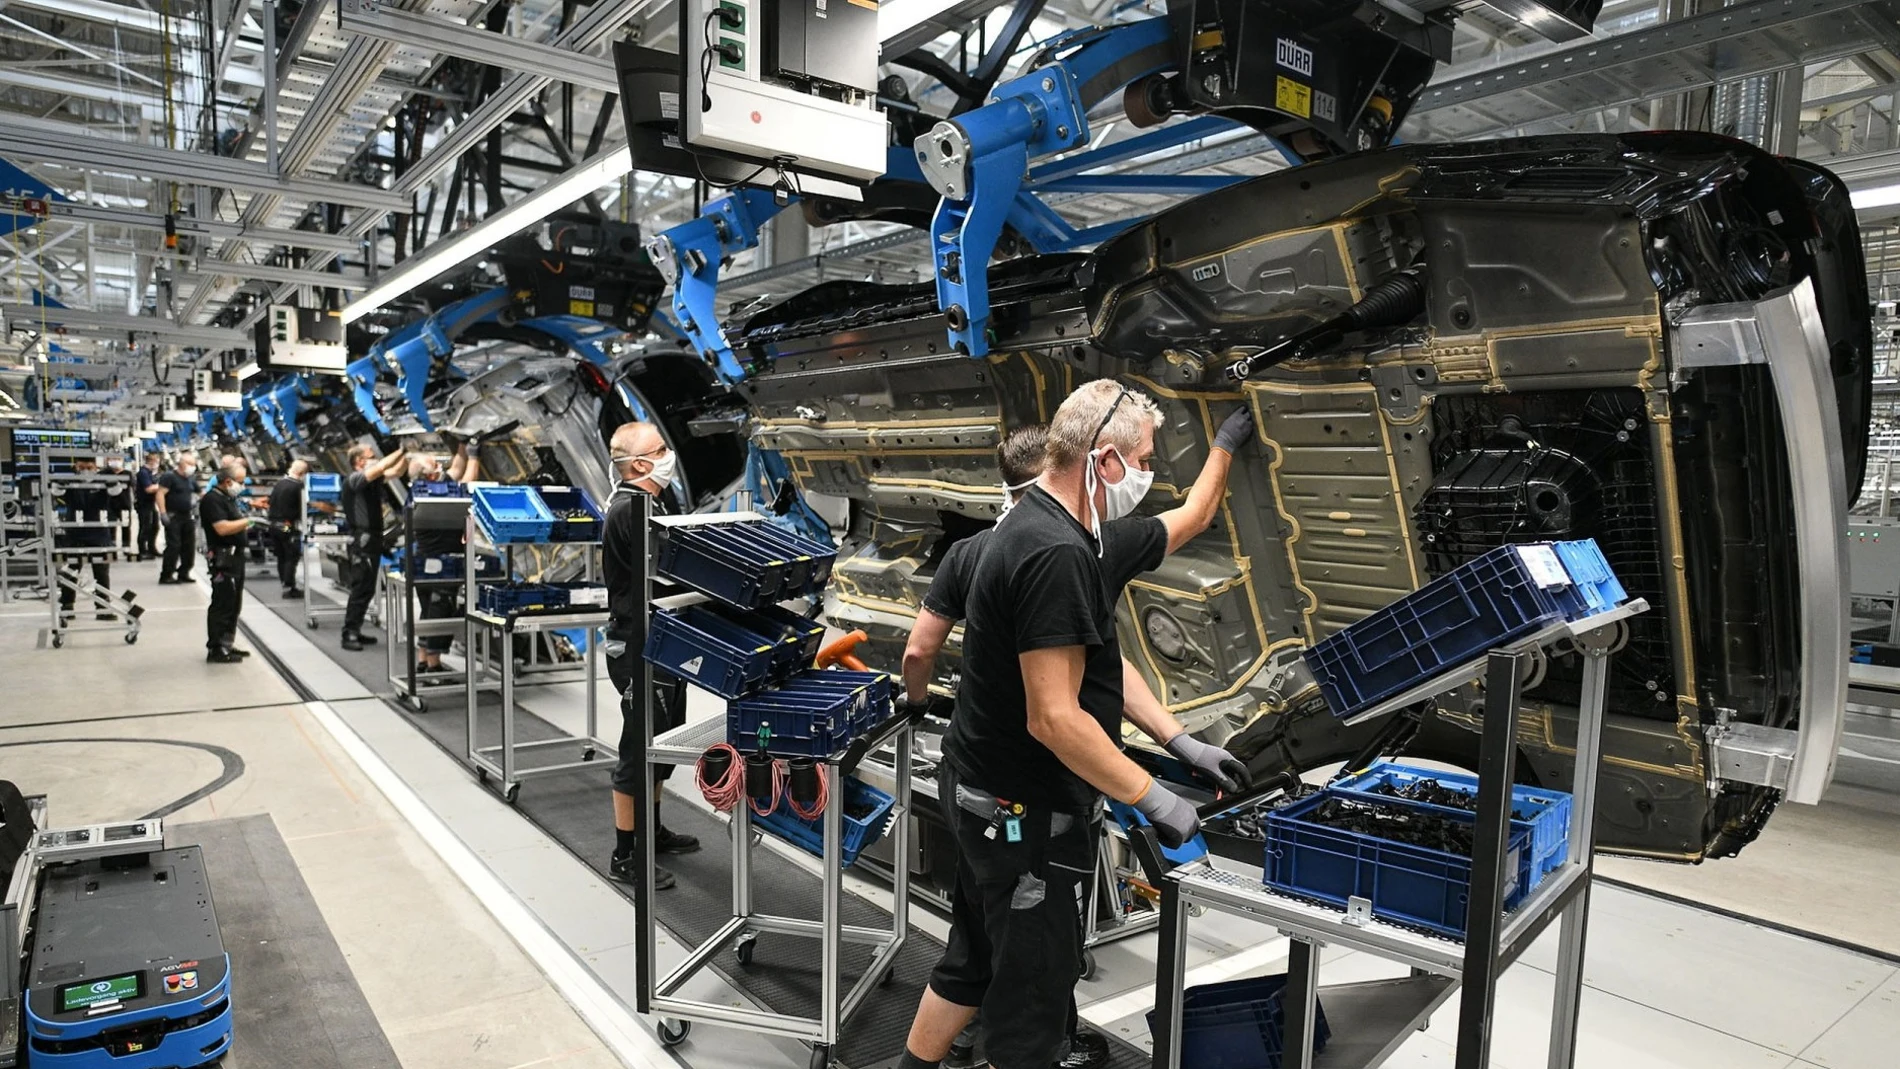 Workers assemble the new Mercedes S-class during a press event for the opening of the Factory 56 production slated line in Sindelfingen, Germany.